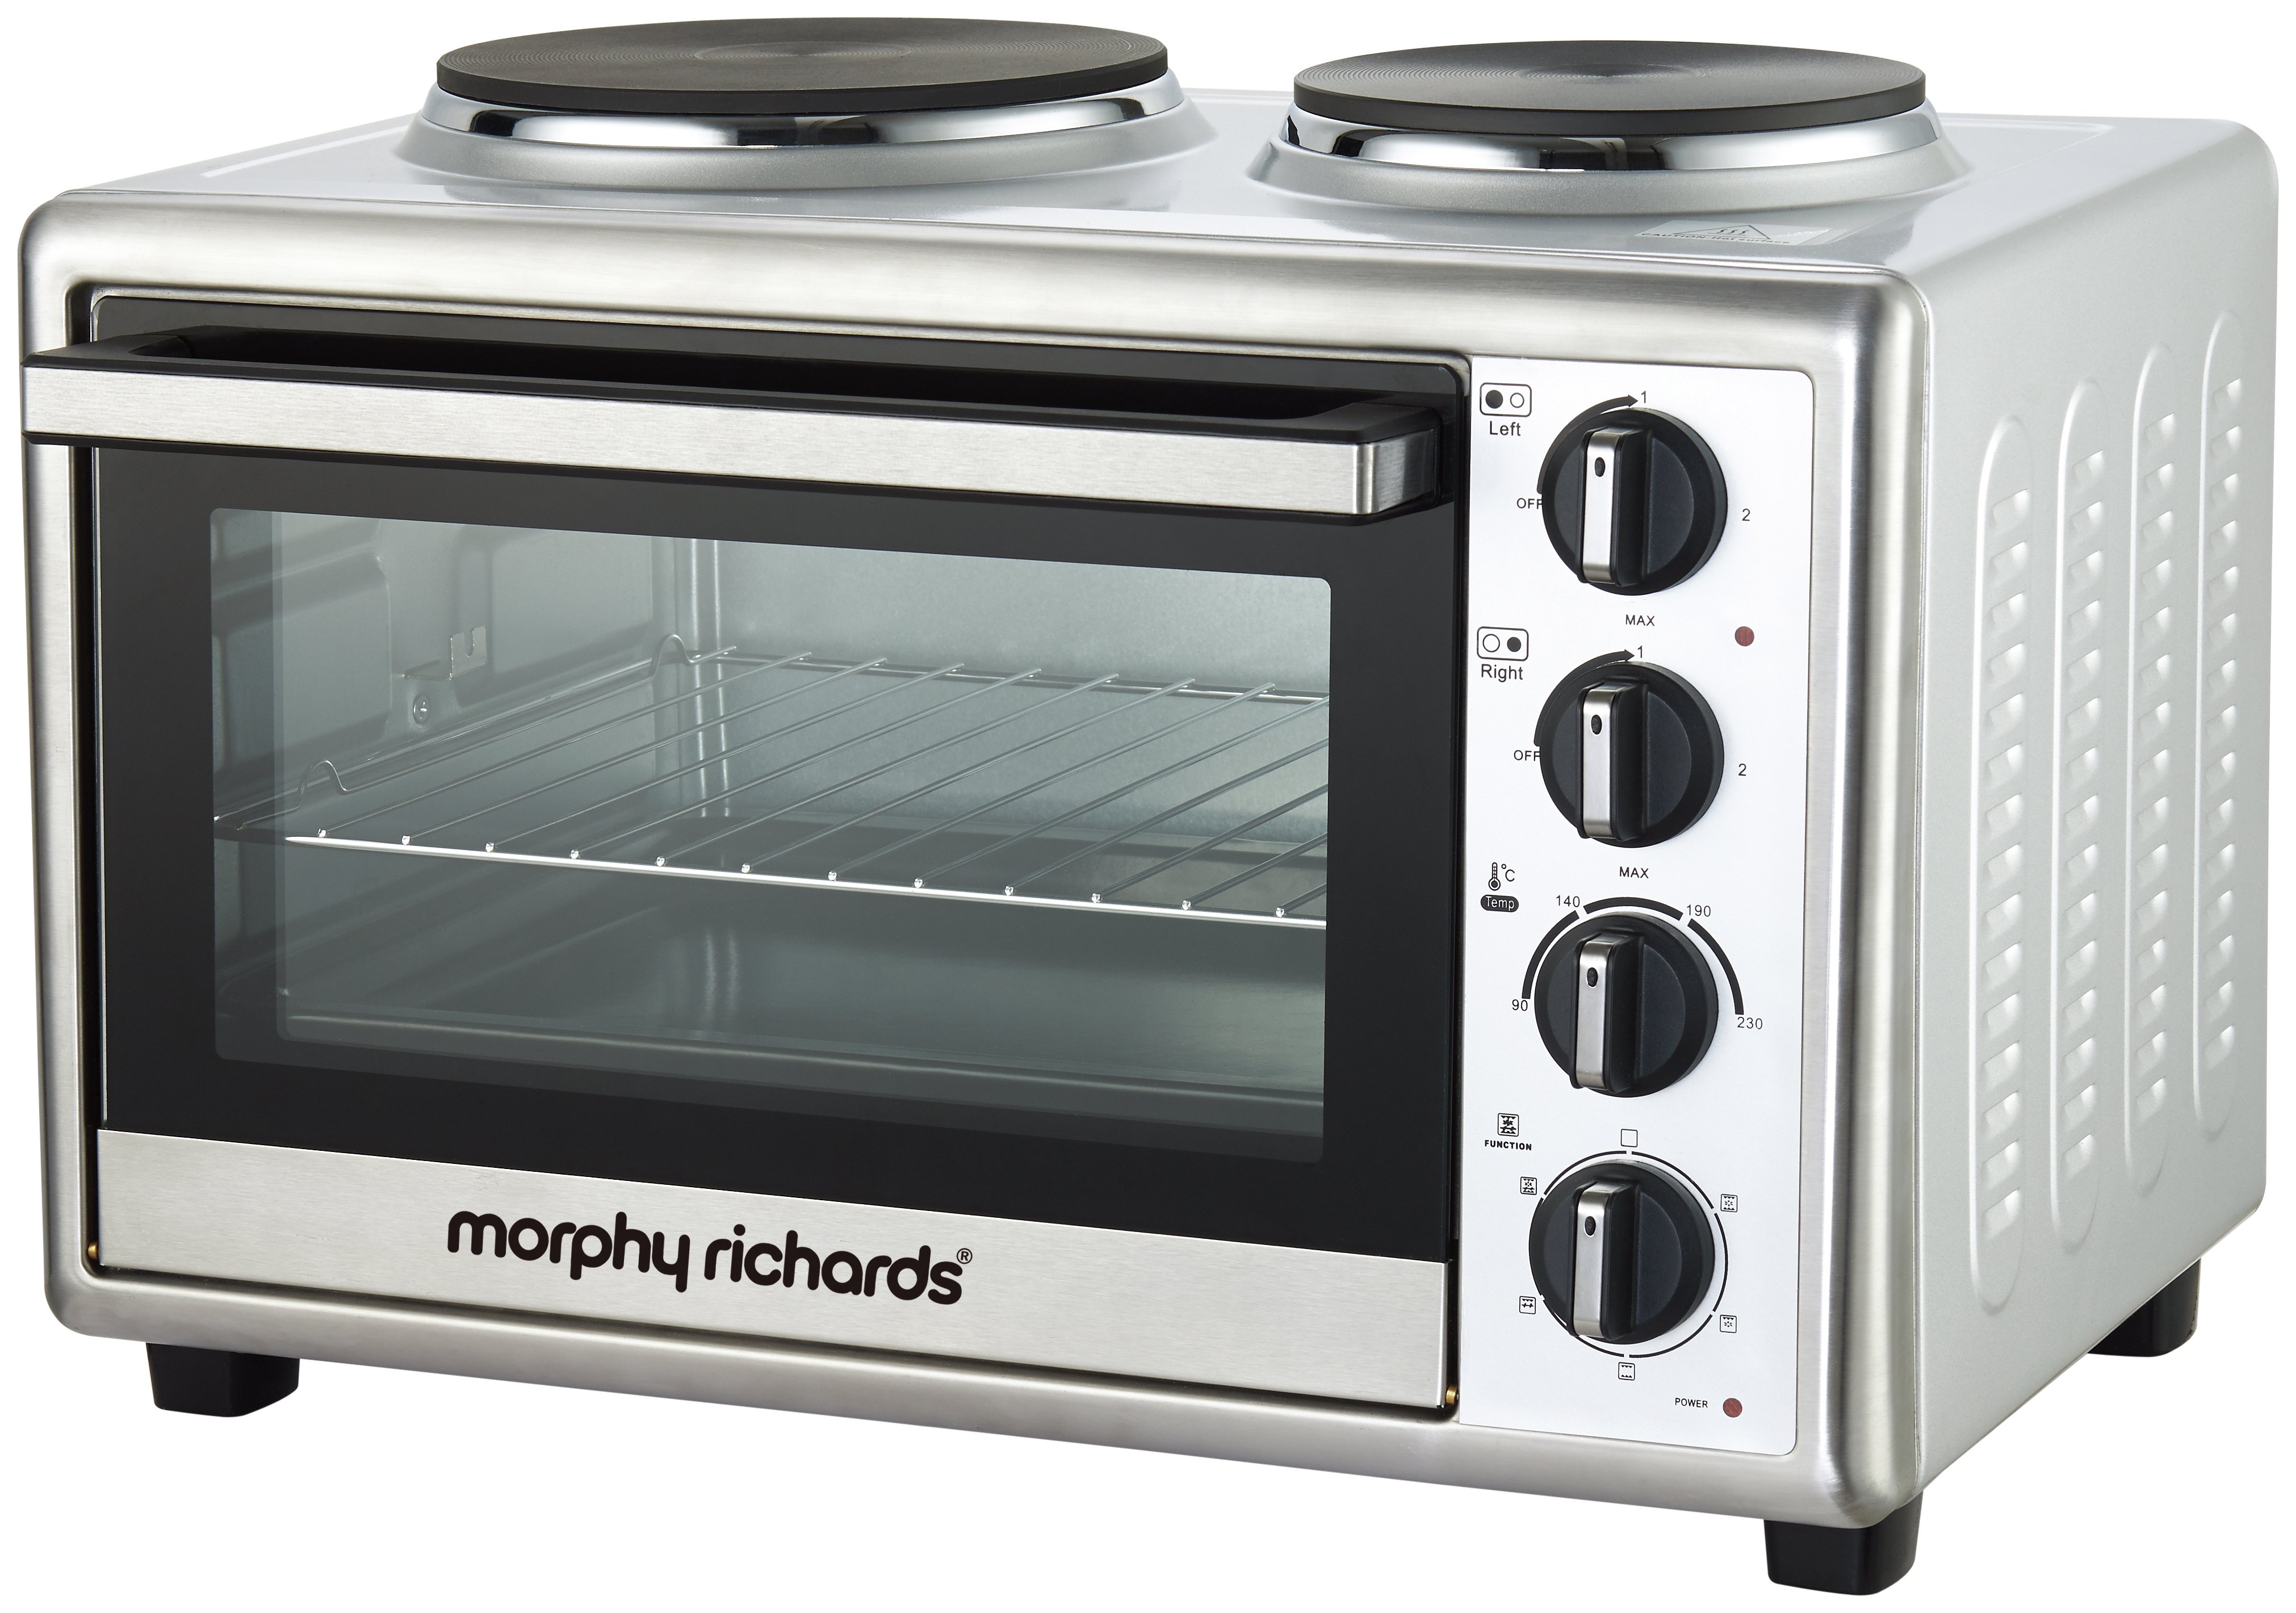 Morphy Richards Convection Mini Oven with Hob - Silver